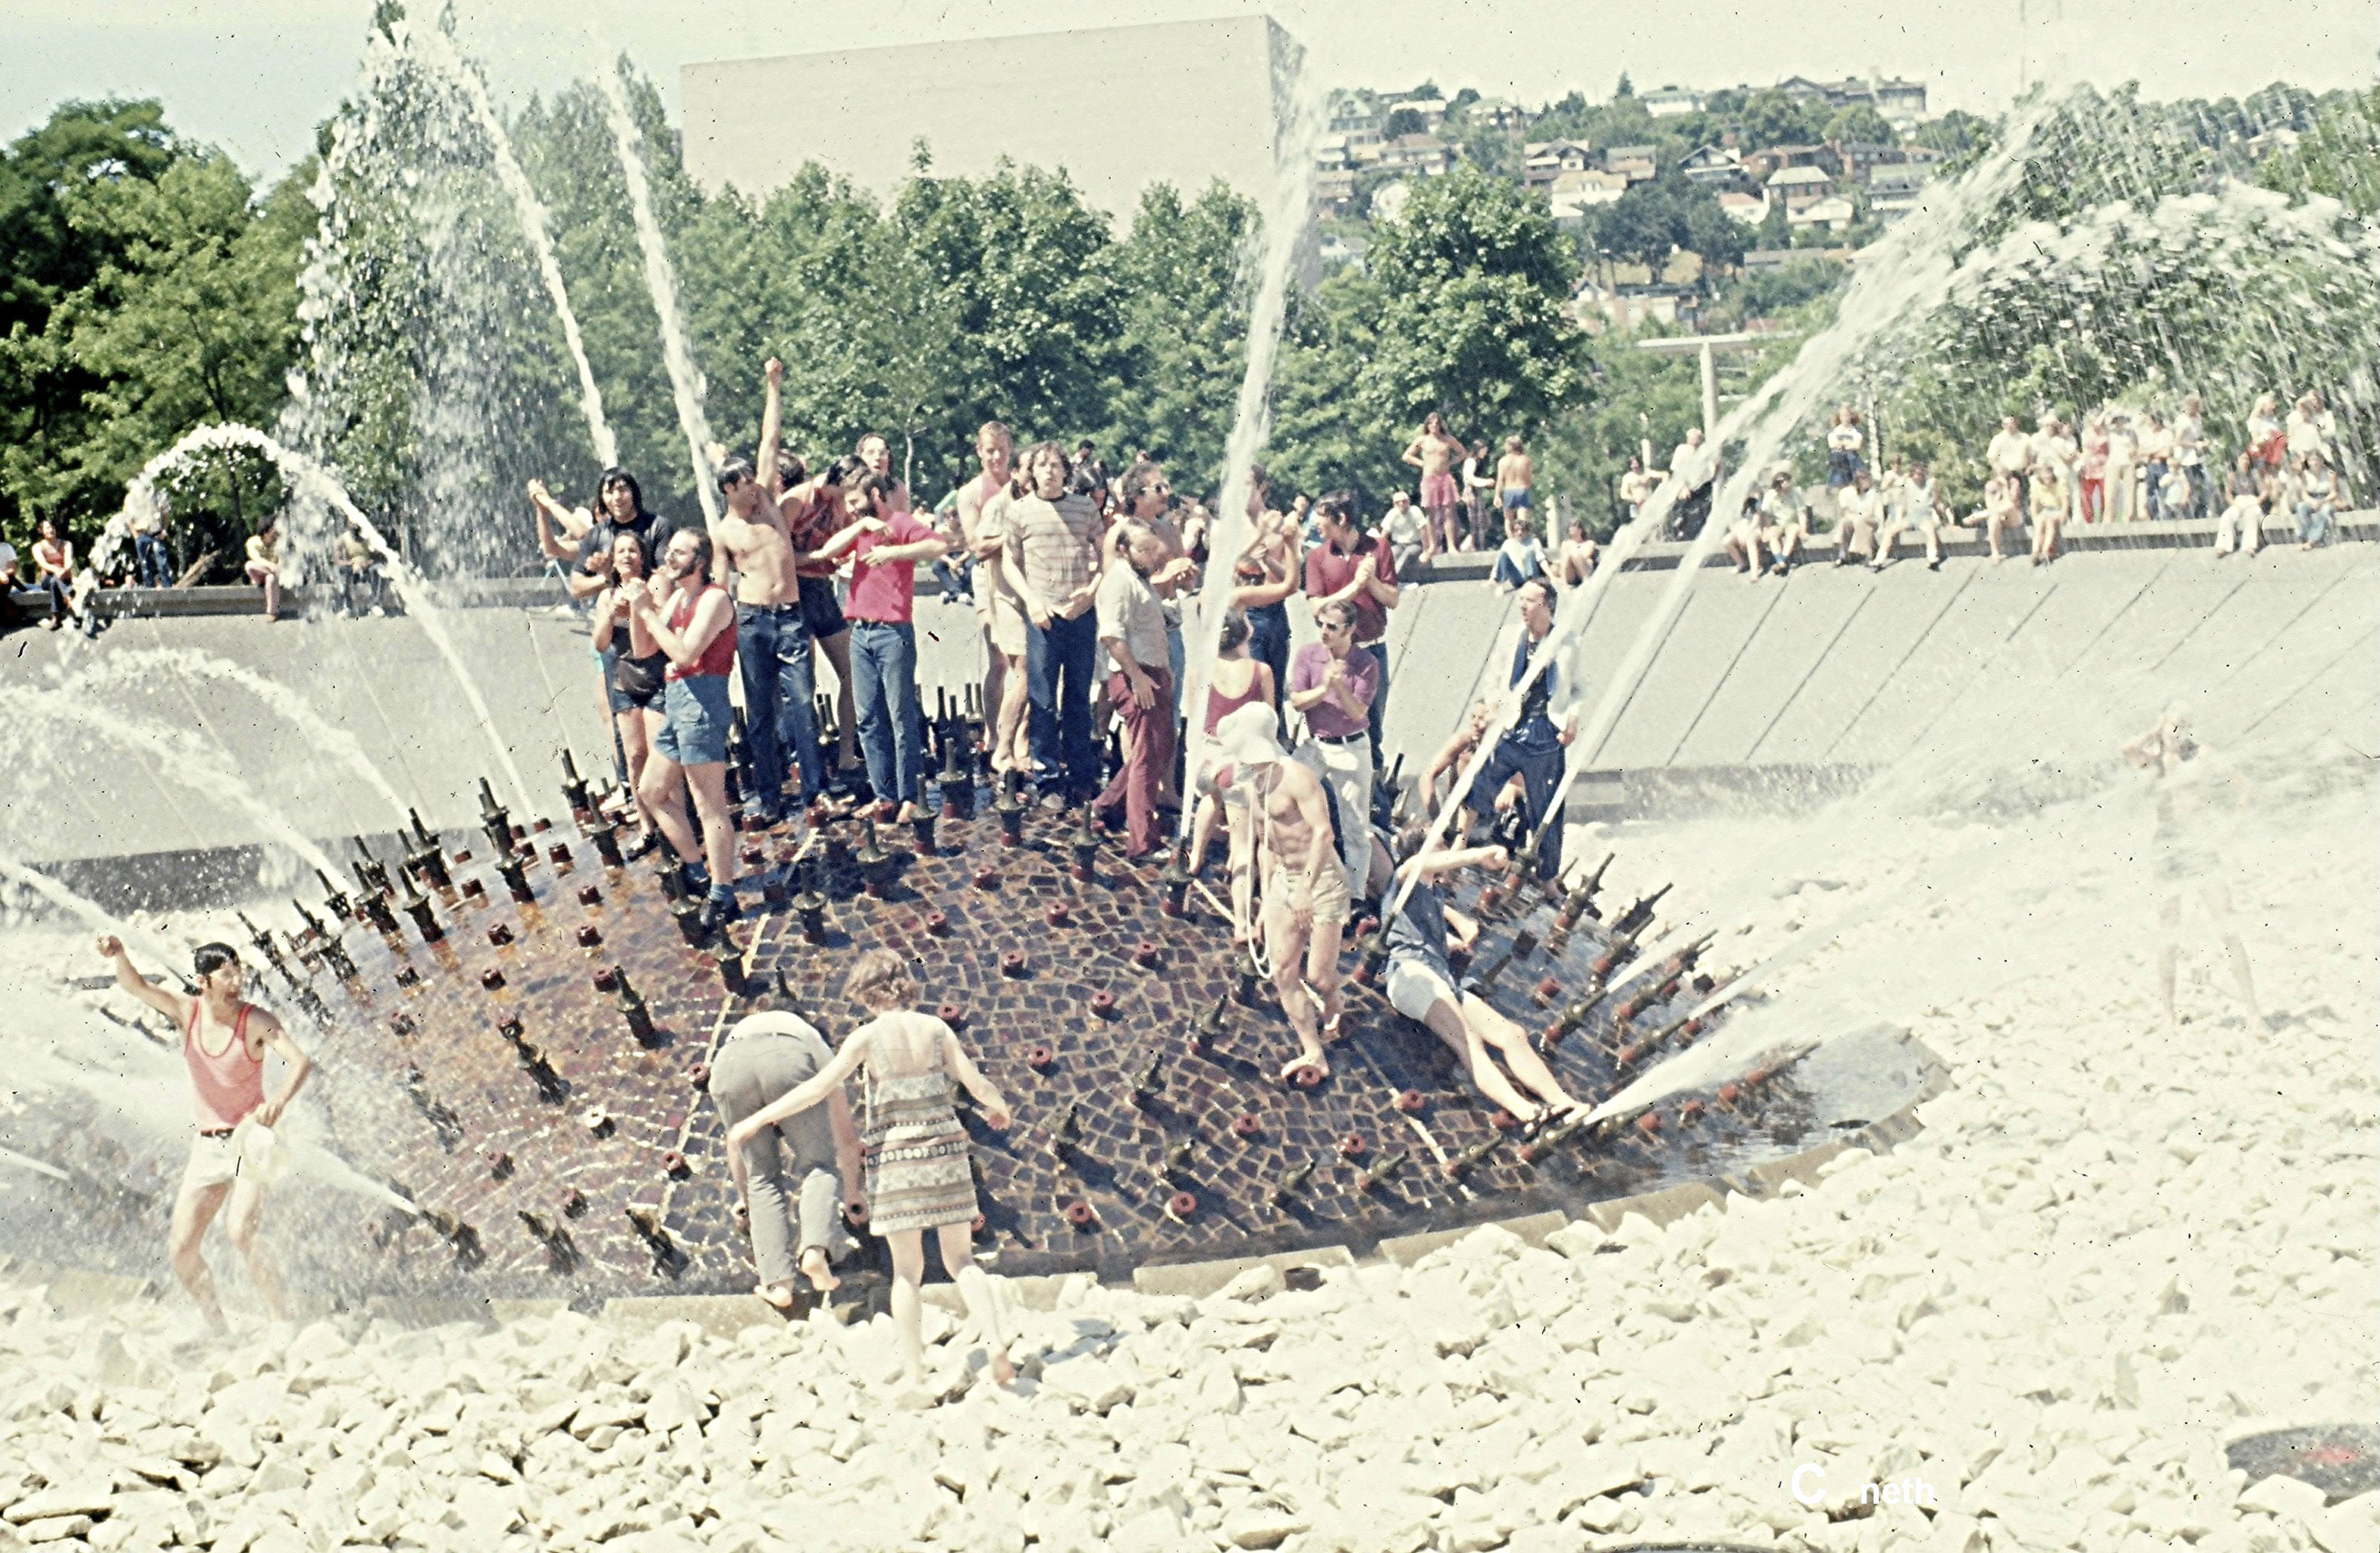 The climactic moment of the first gay-pride event took place in the International Fountain.